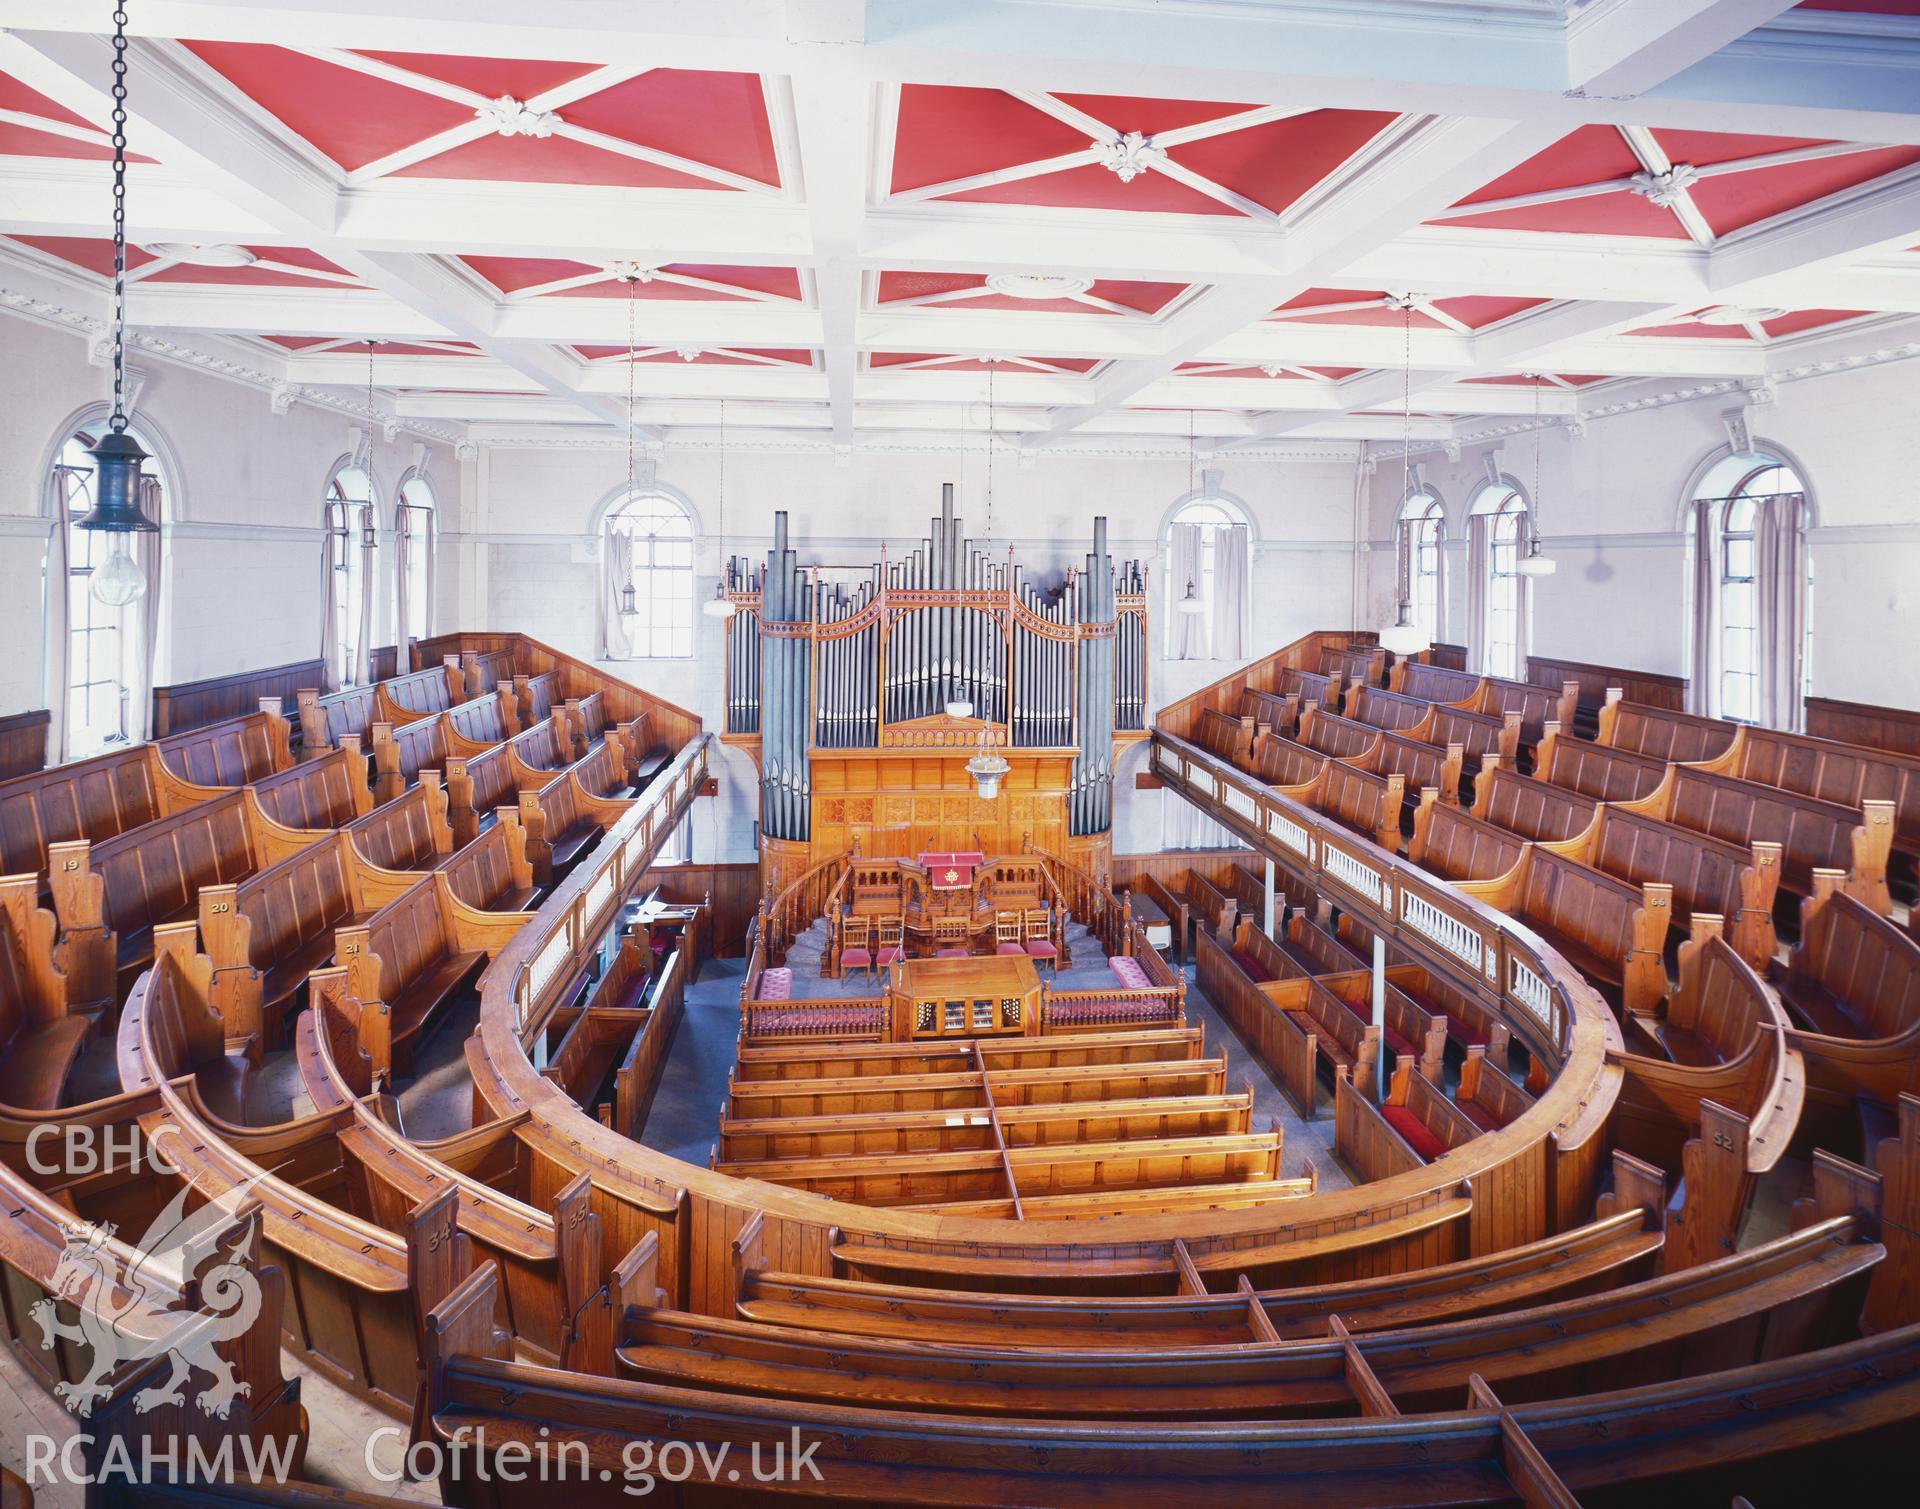 RCAHMW colour transparency showing interior view of Tabernacle Chapel,  Aberystwyth, photographed by Iain Wright, 1997.